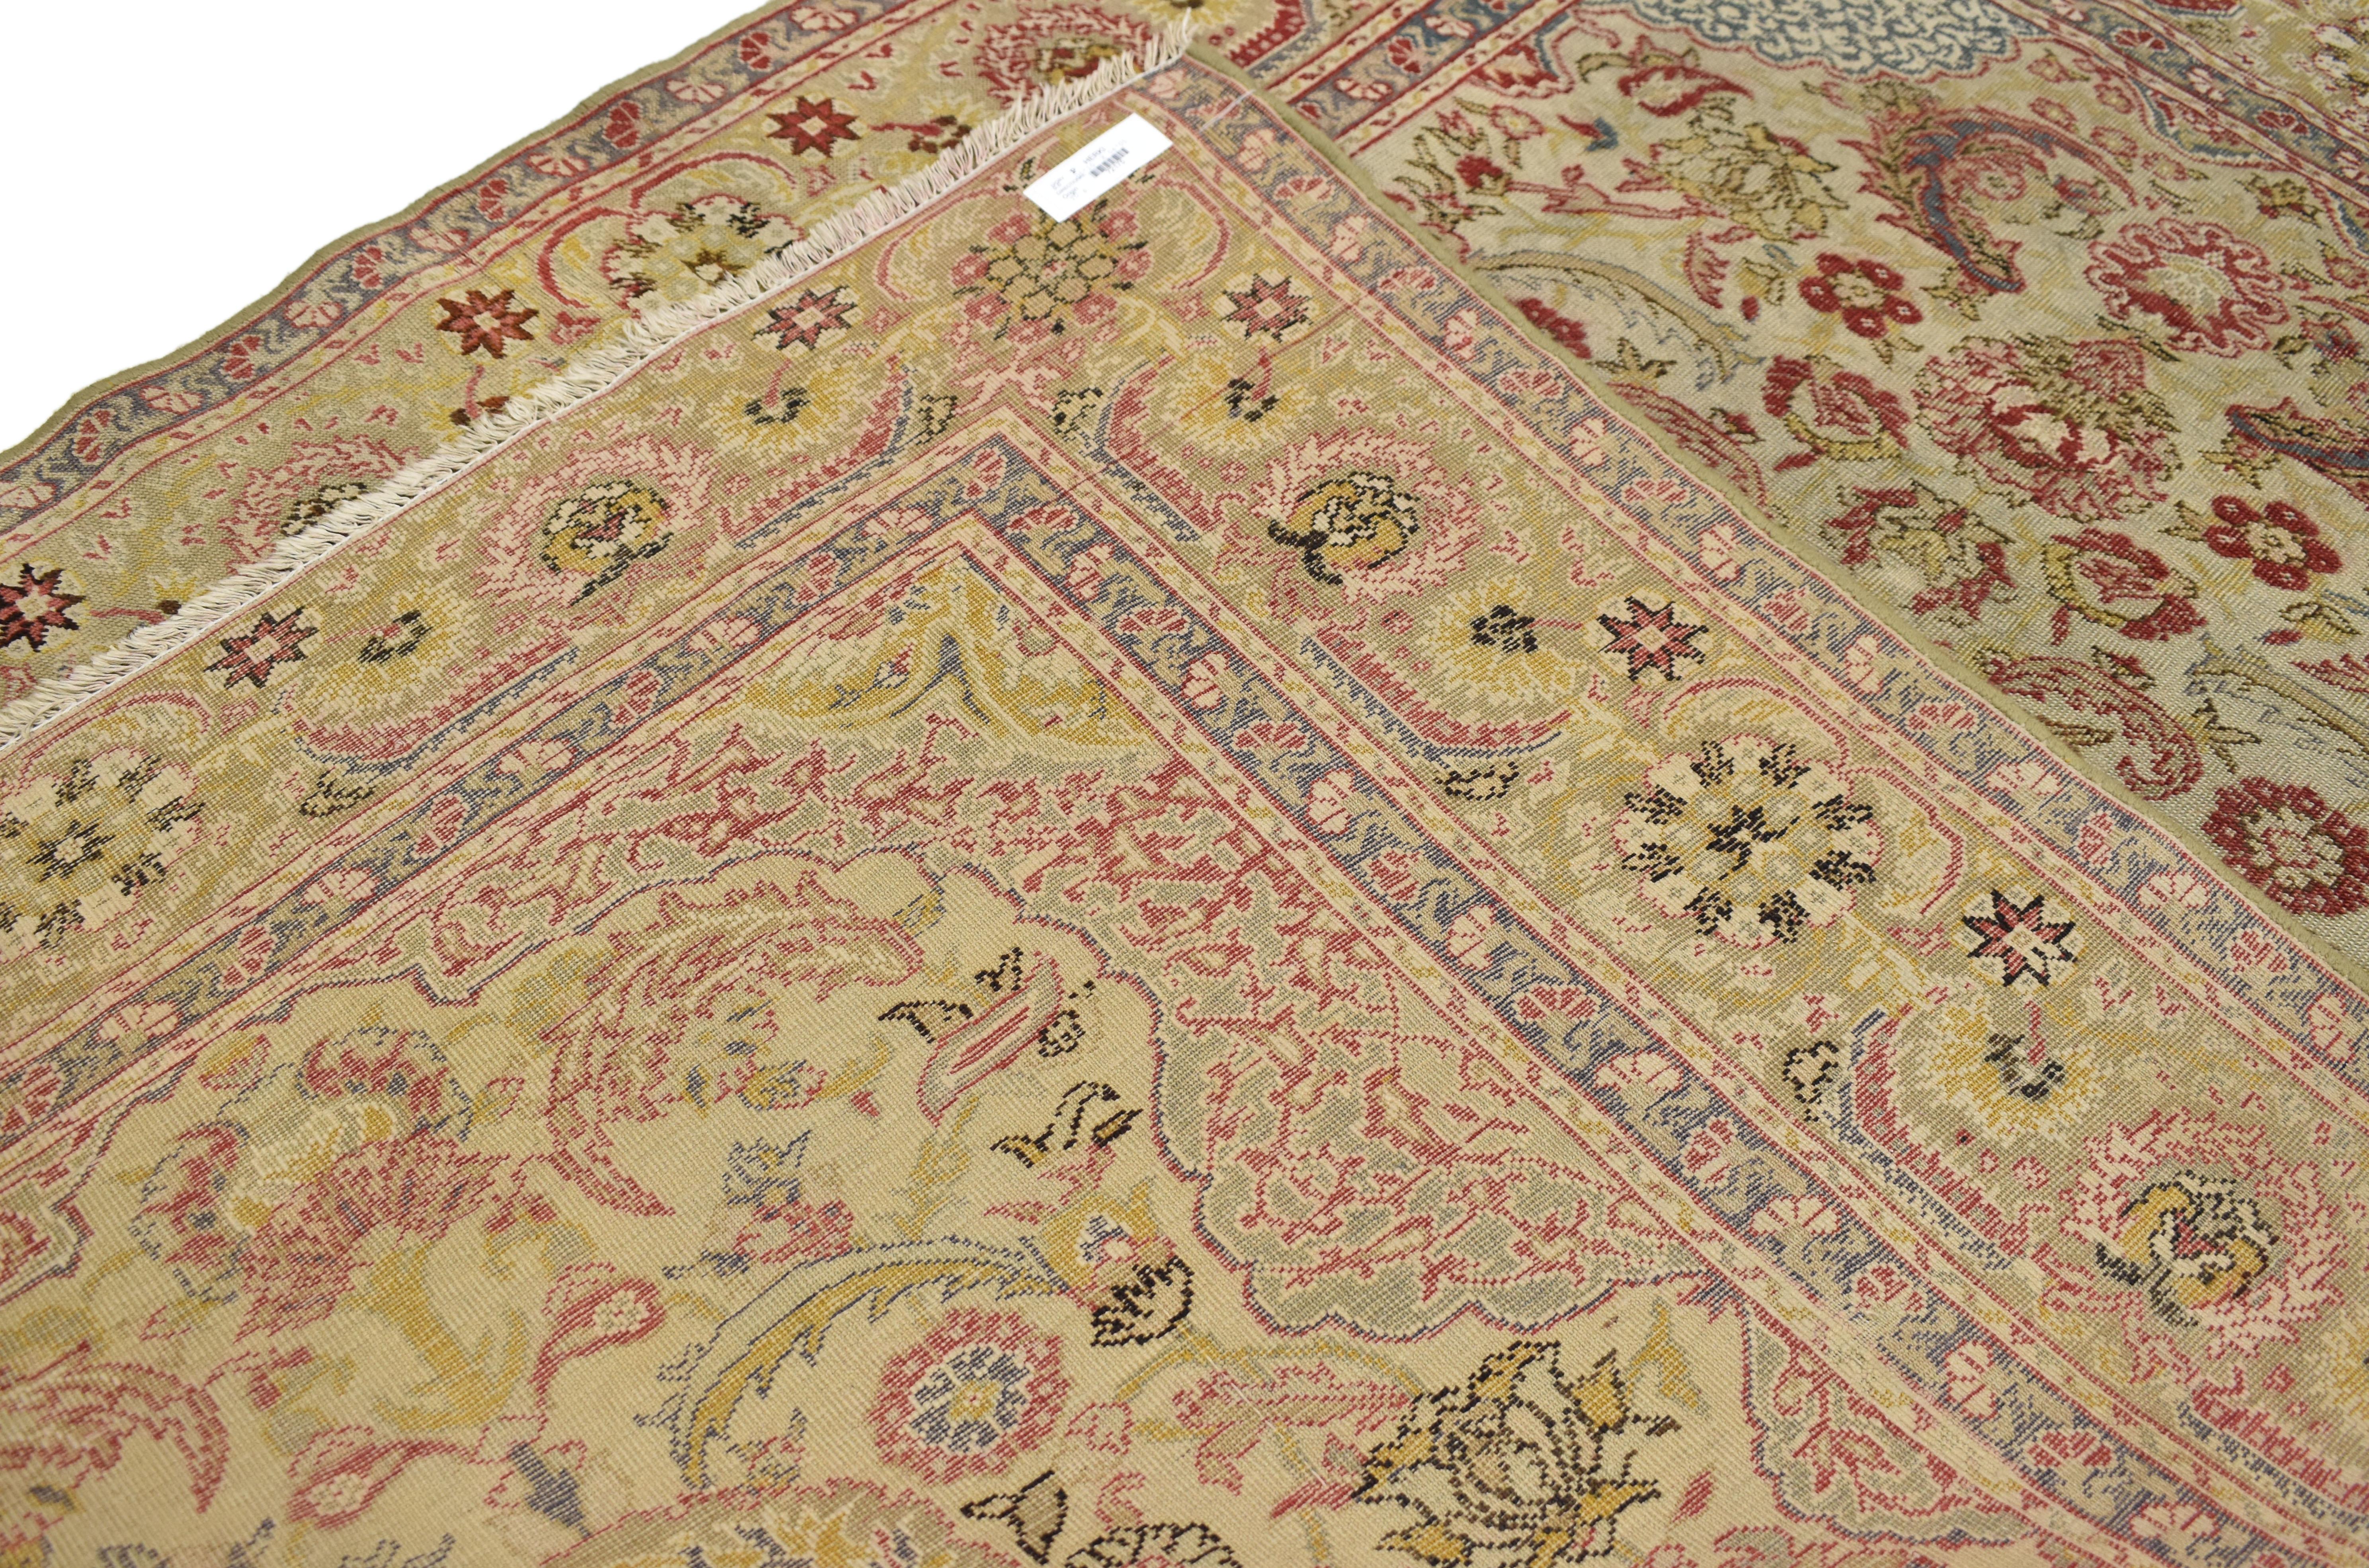 Hand-Knotted Distressed Antique Turkish Hereke Rug with Rustic English Country Cottage Style